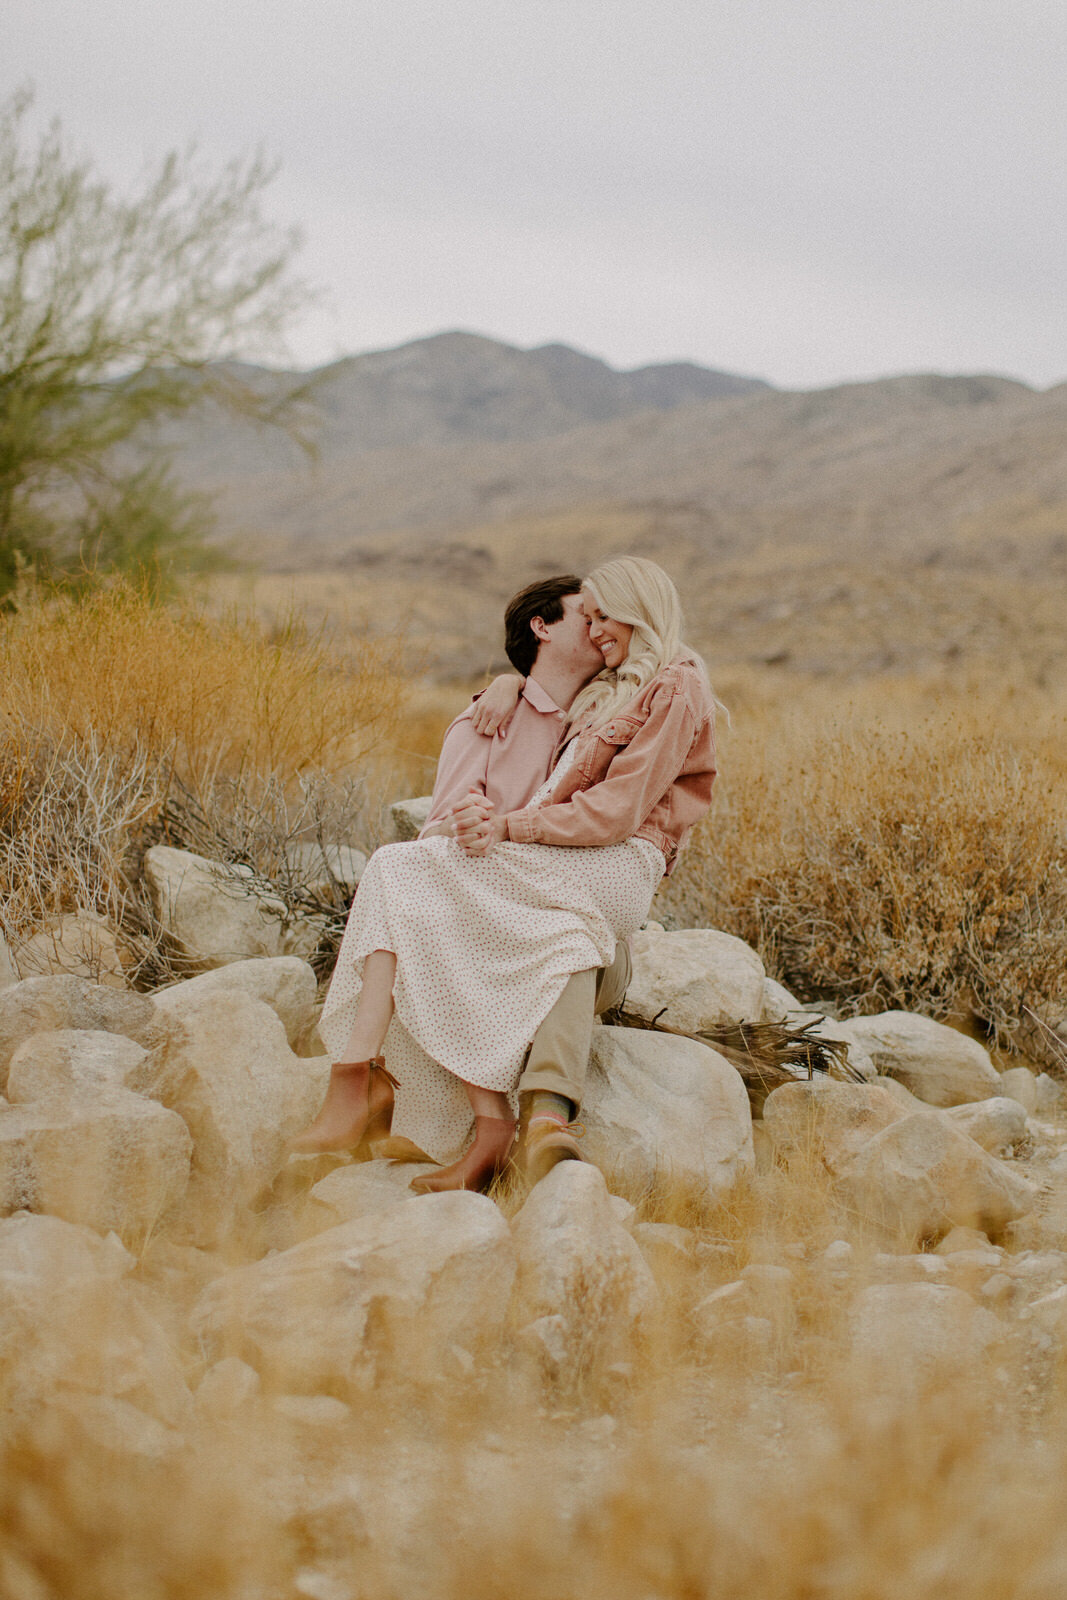 Brianna-Broyles-Photography-Pink-Palm-Springs-Engagement-Session-6.jpg